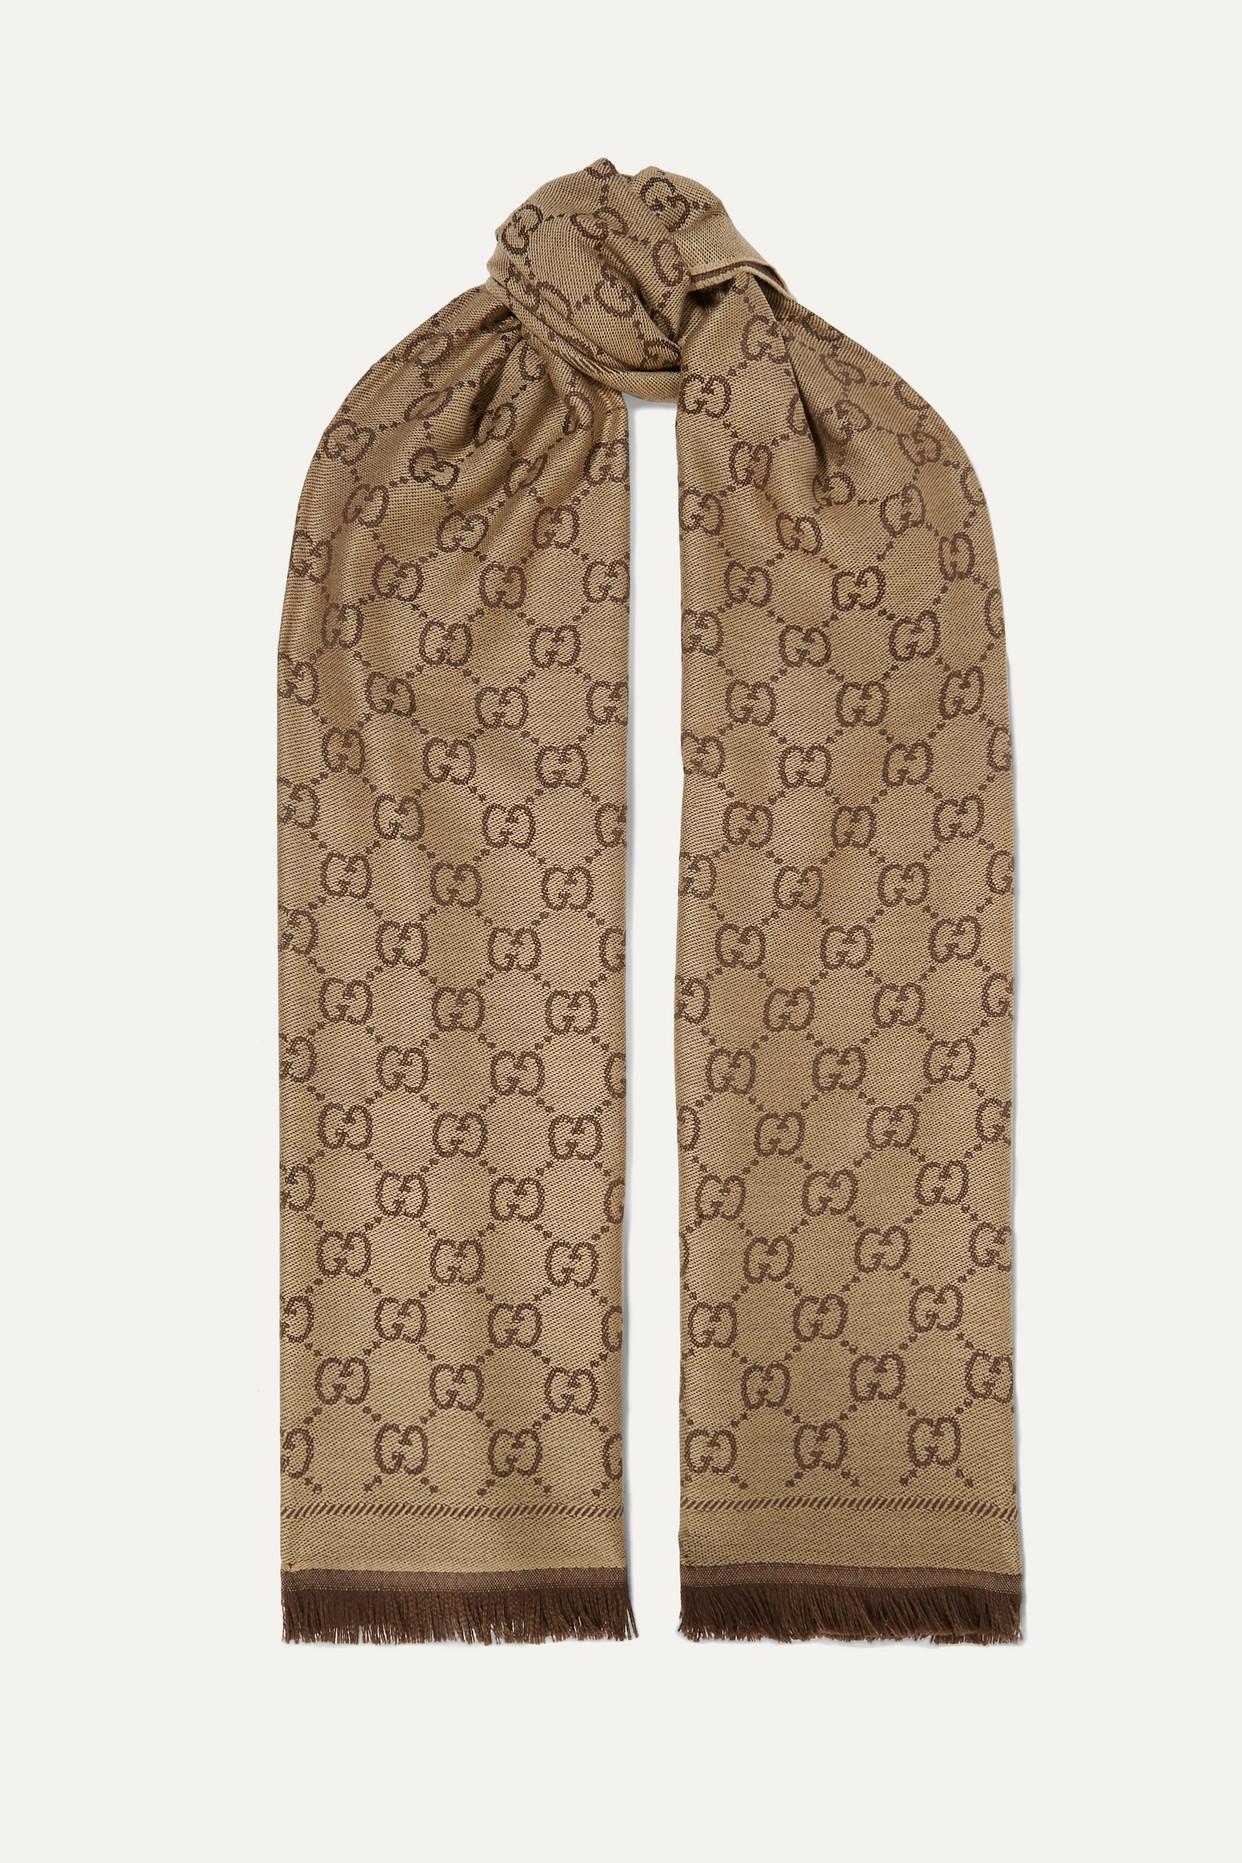 Gucci + Net Sustain Fringed Organic Wool-jacquard Scarf in Brown | Lyst